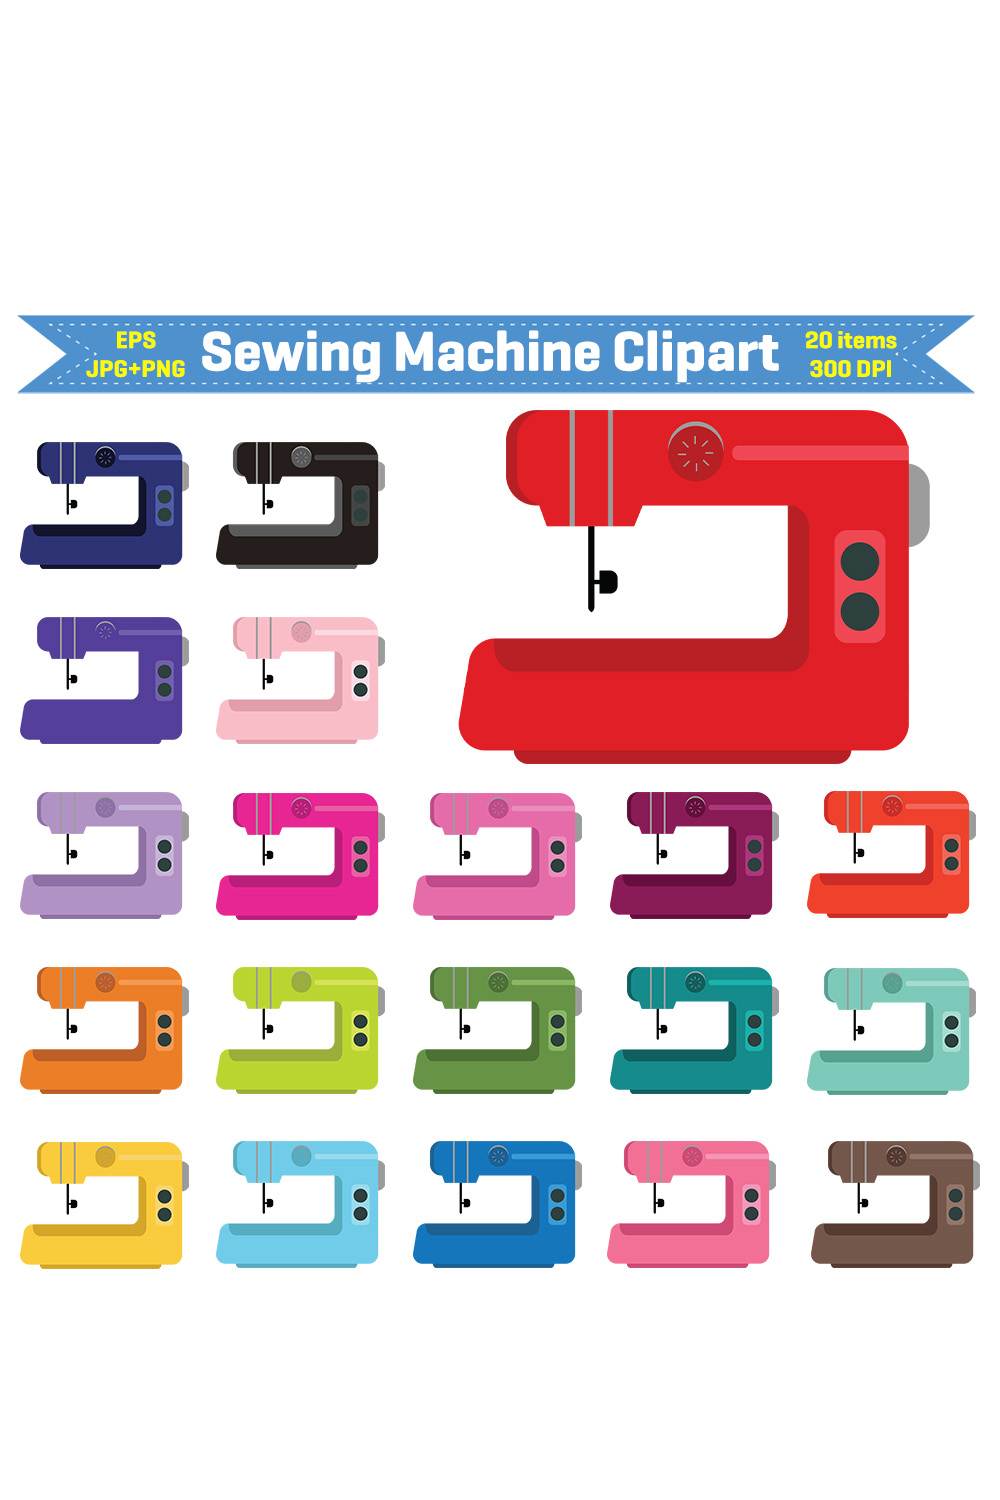 Sewing Machine Clipart pinterest preview image.